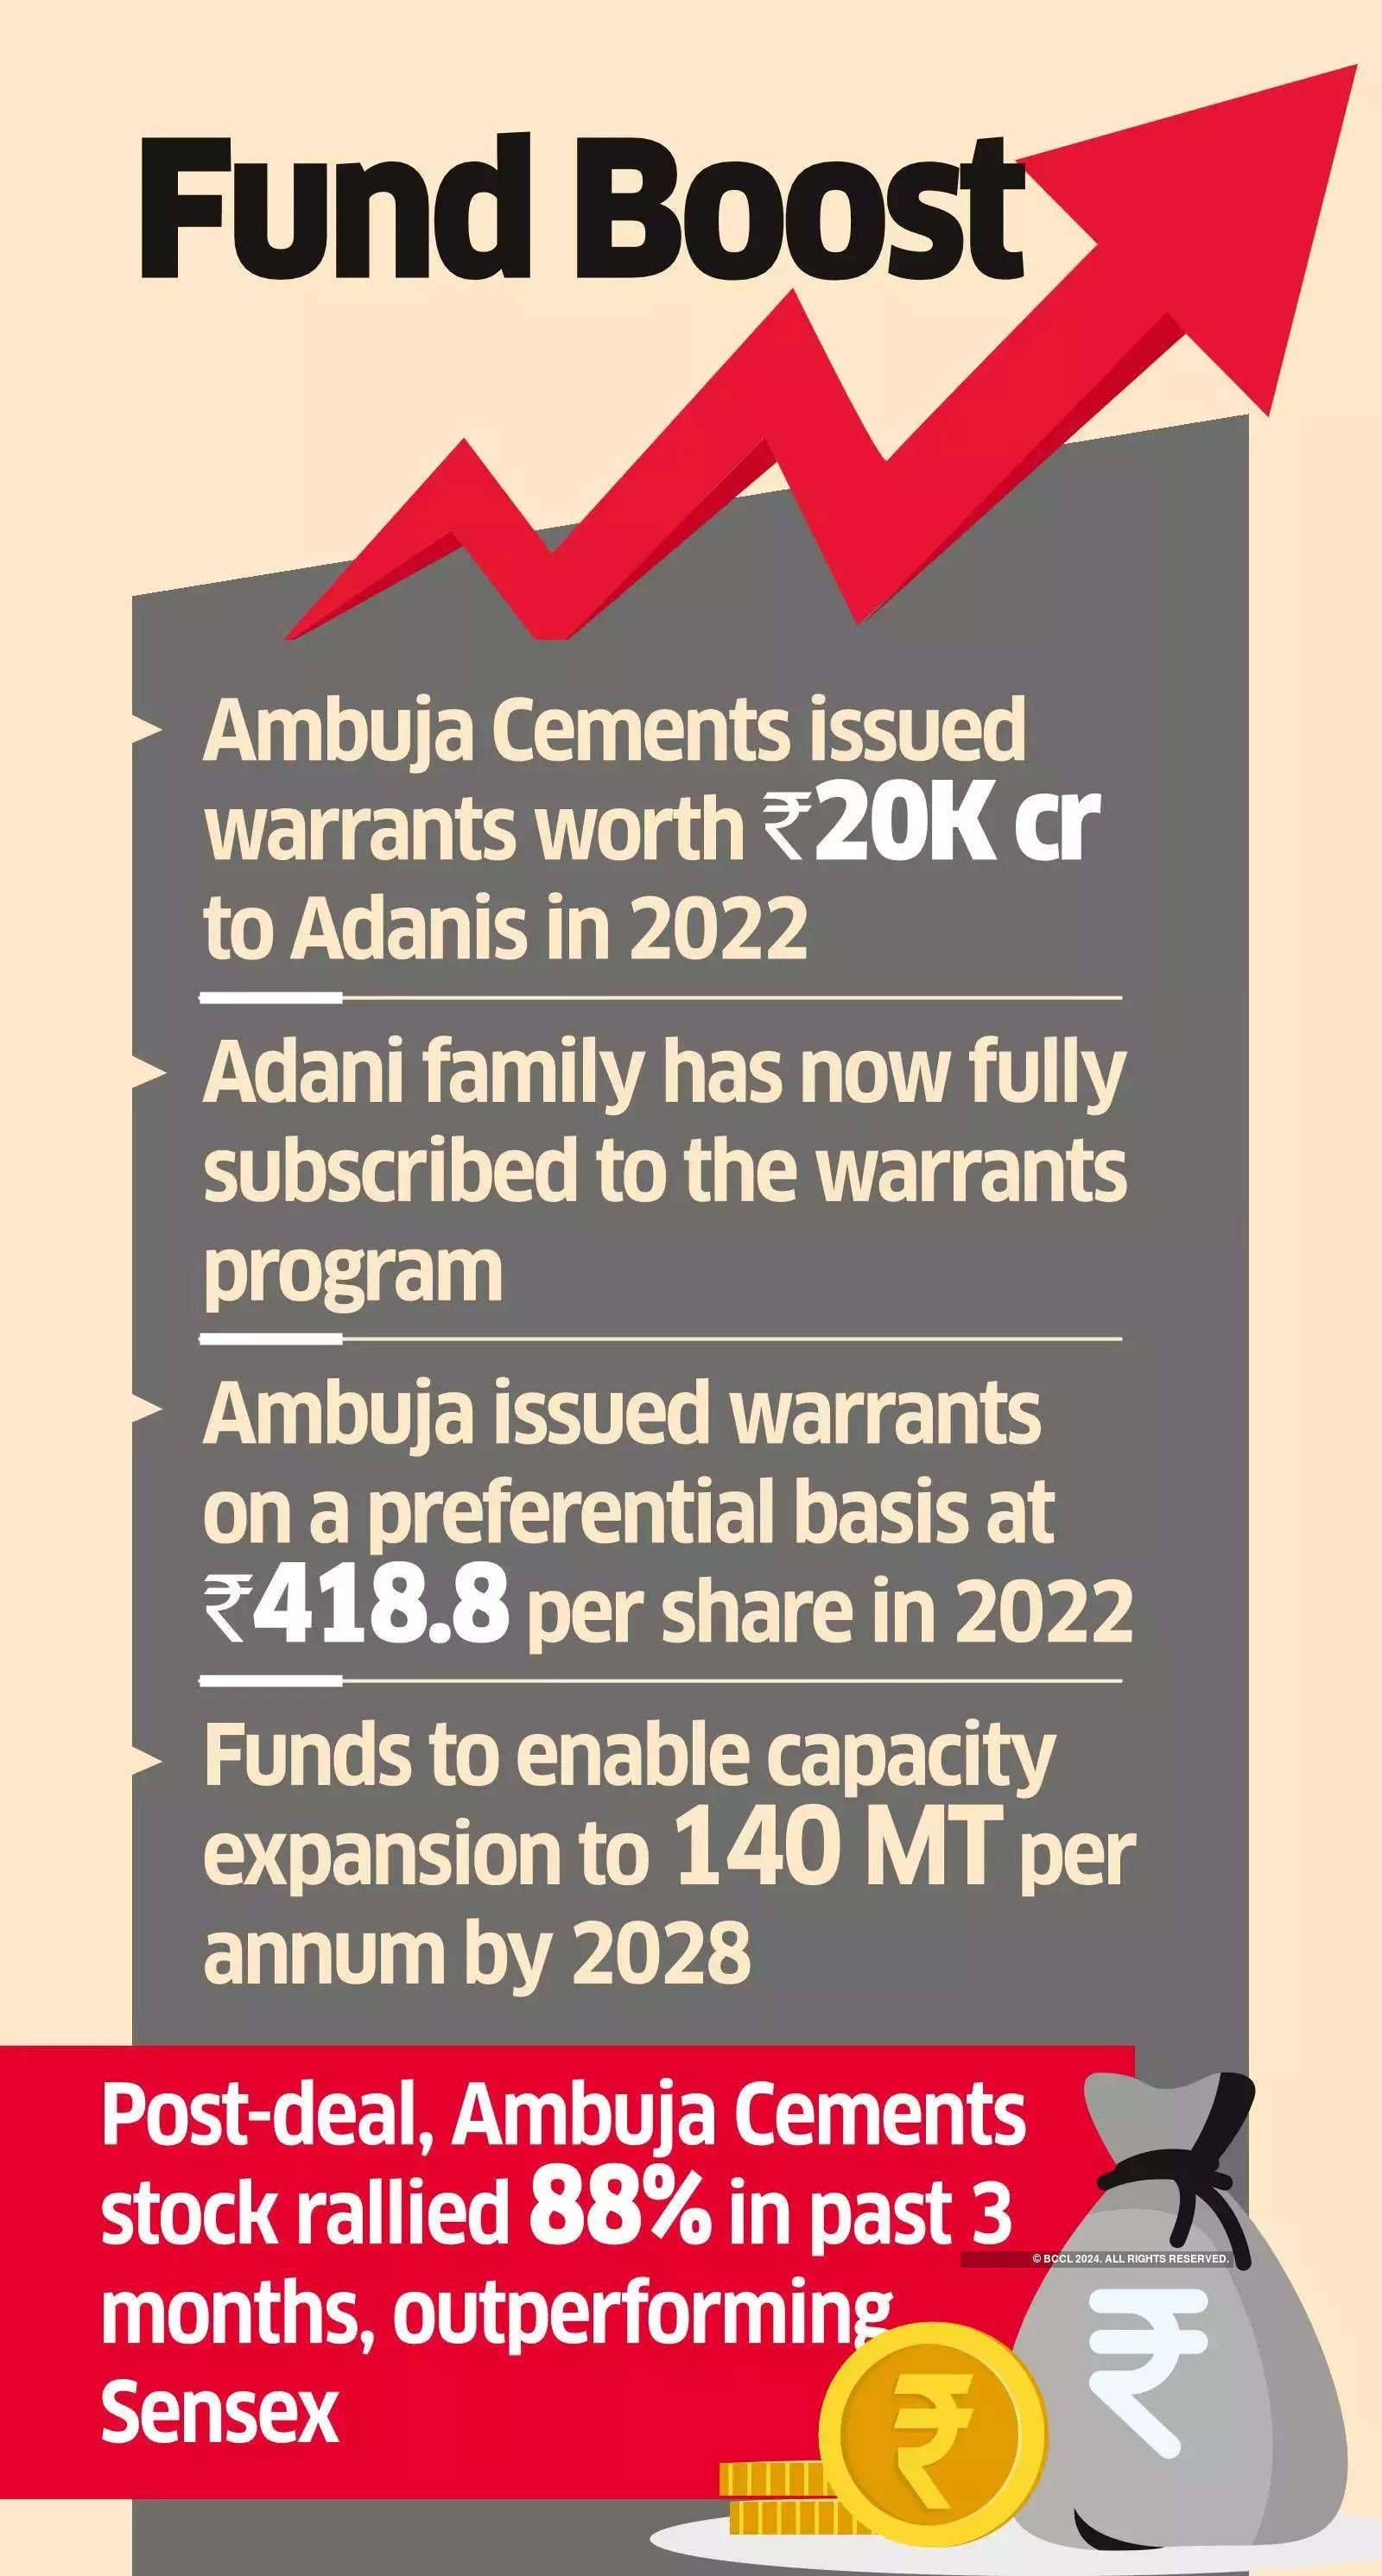 Adani group increase its stake in Ambuja Cements to 70.3% by converting warrants